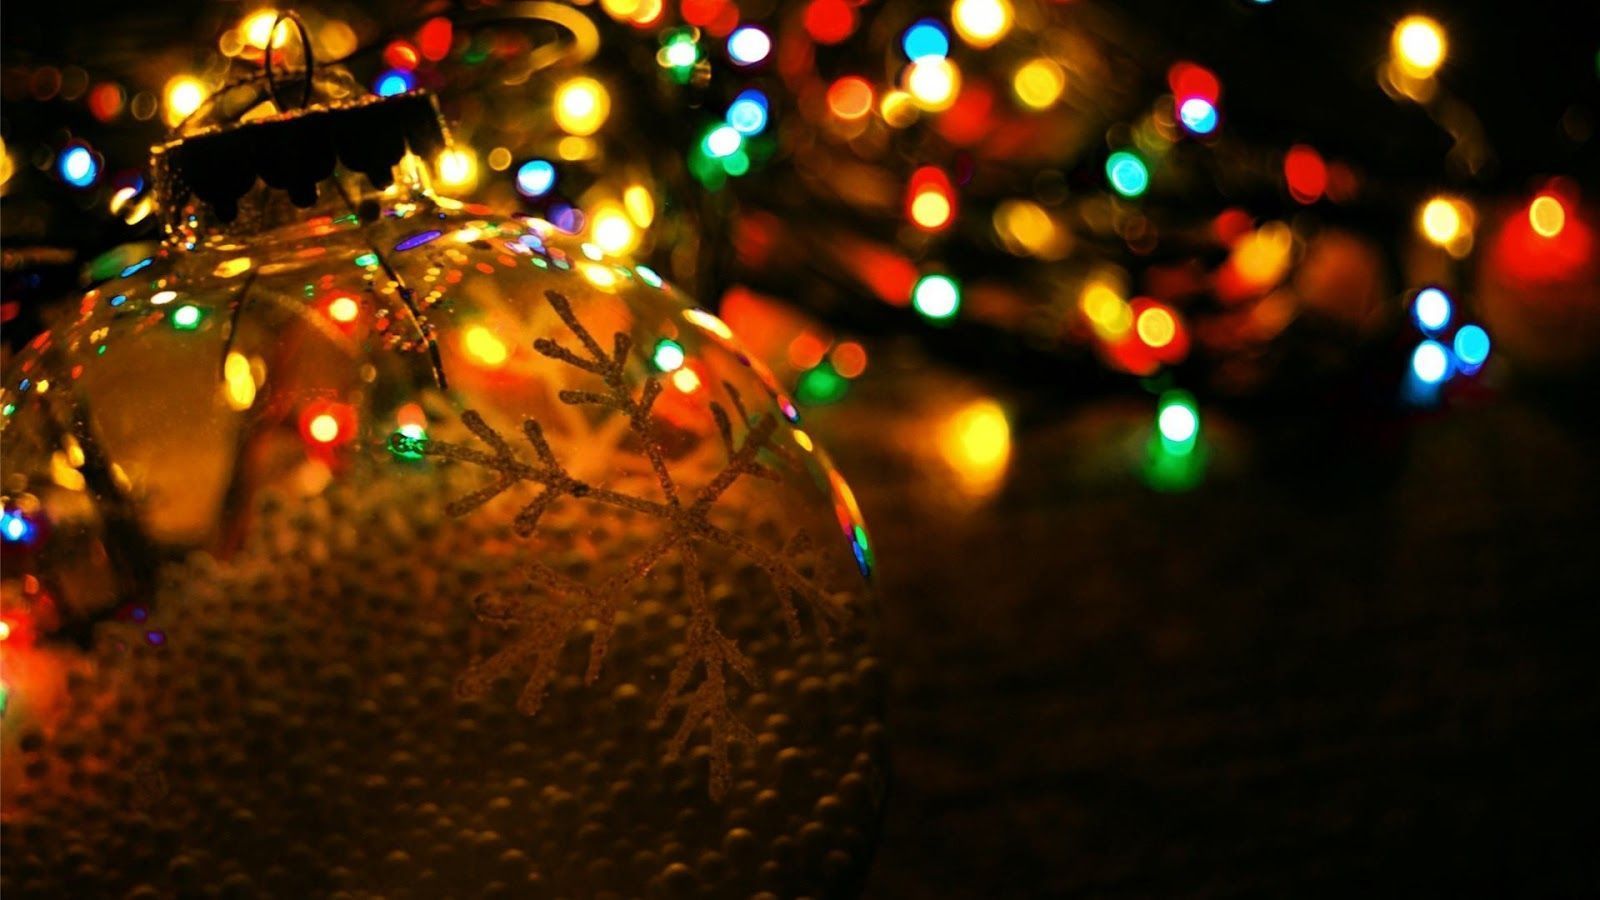 Amazing Christmas light wallpaper to decorate your holidays